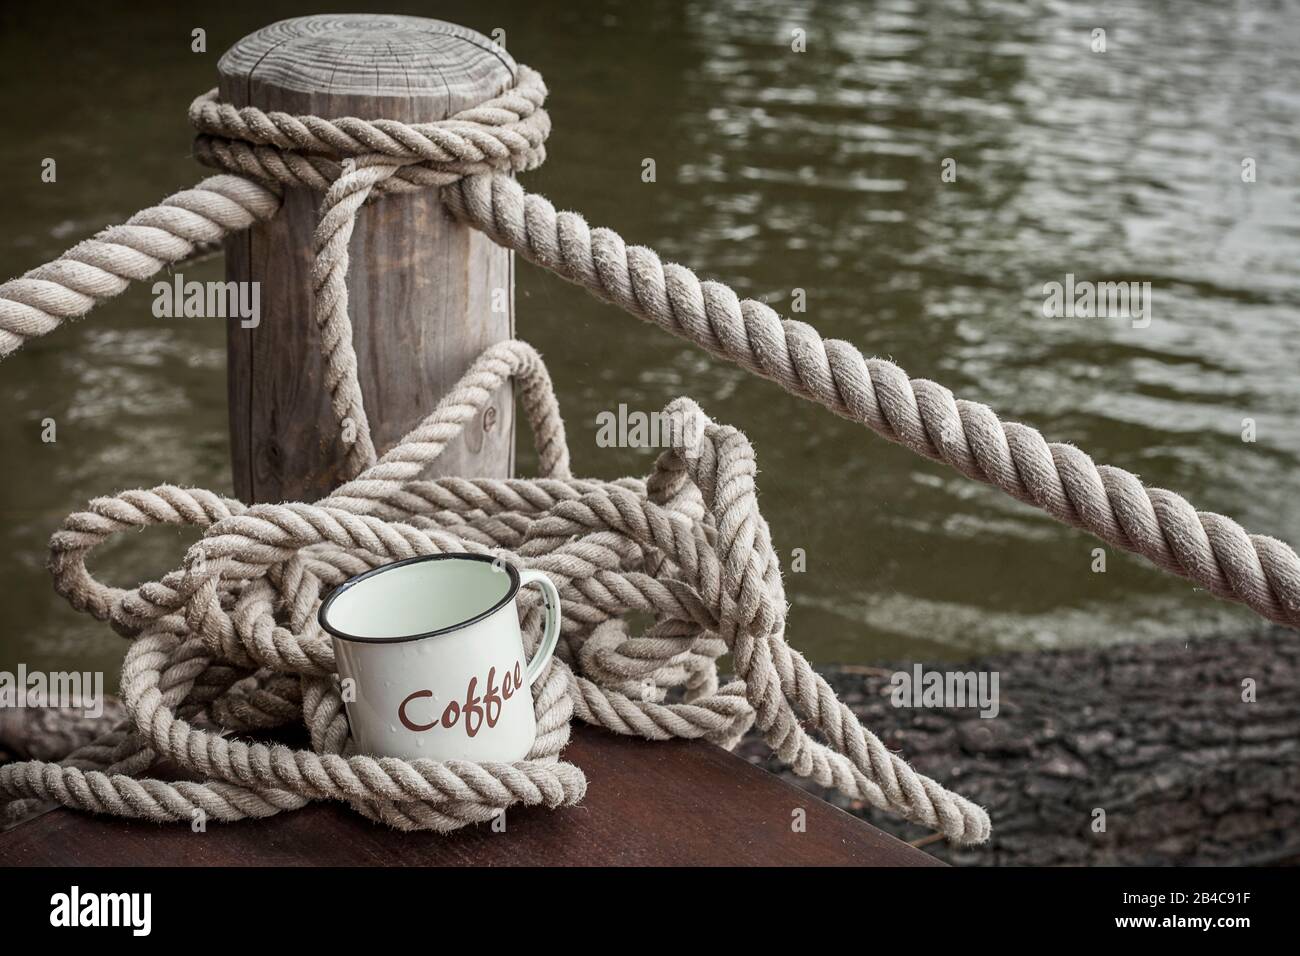 https://c8.alamy.com/comp/2B4C91F/rustic-enamel-coffee-cup-with-word-coffee-on-it-and-decorative-thick-rope-on-a-wooden-jetty-at-the-waters-edge-2B4C91F.jpg